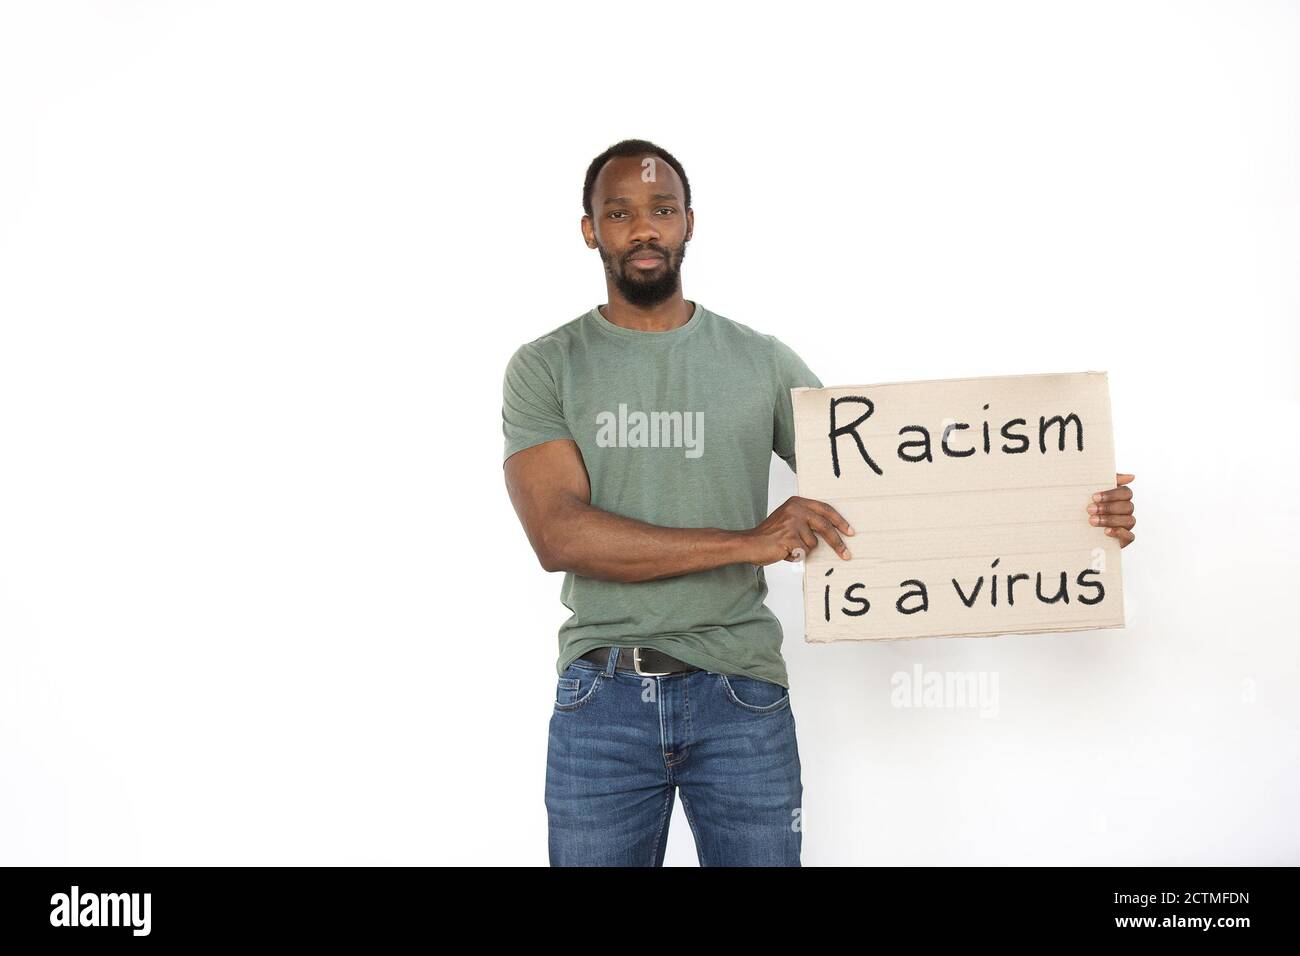 Racism is a virus. Young man protesting with sign isolated on white studio background. Activism, active social position, protest, actual problems. Meeting against human rights, abusing, racism. Stock Photo